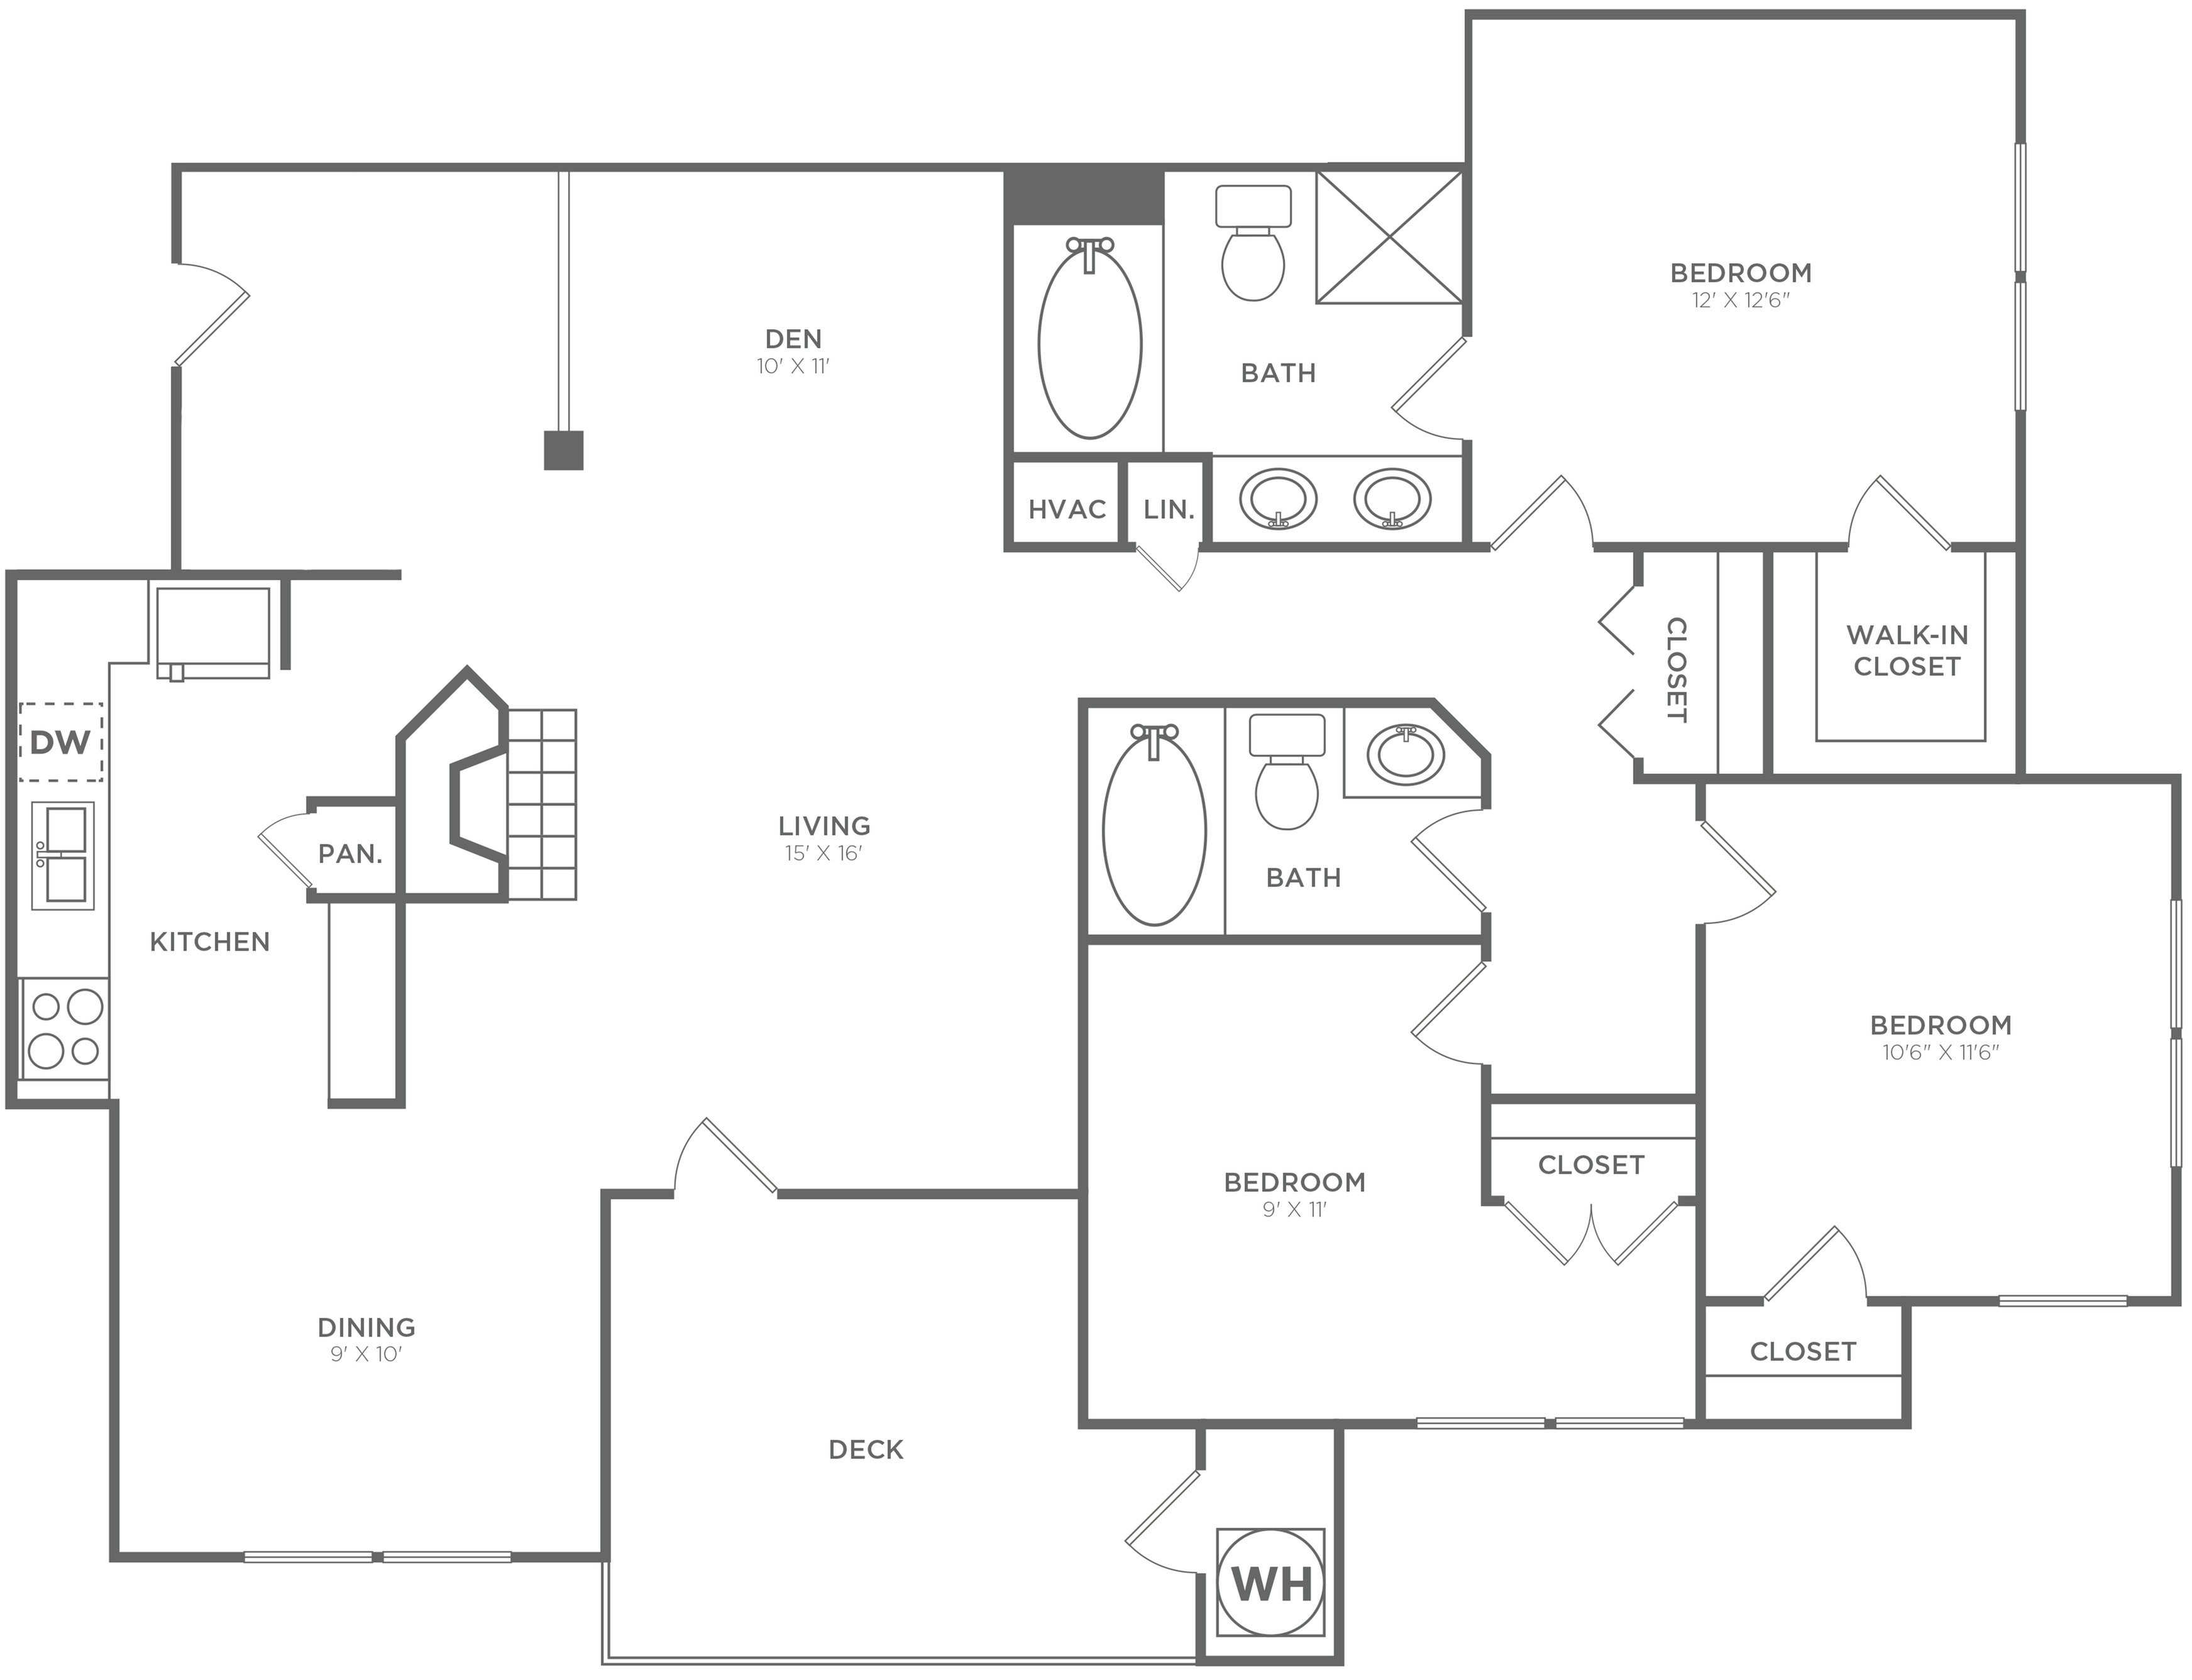 3x2 | 1315 SF | Floor plan map for a three bedroom unit at our apartments for rent in Bellevue, featuring labeled rooms with dimensions.